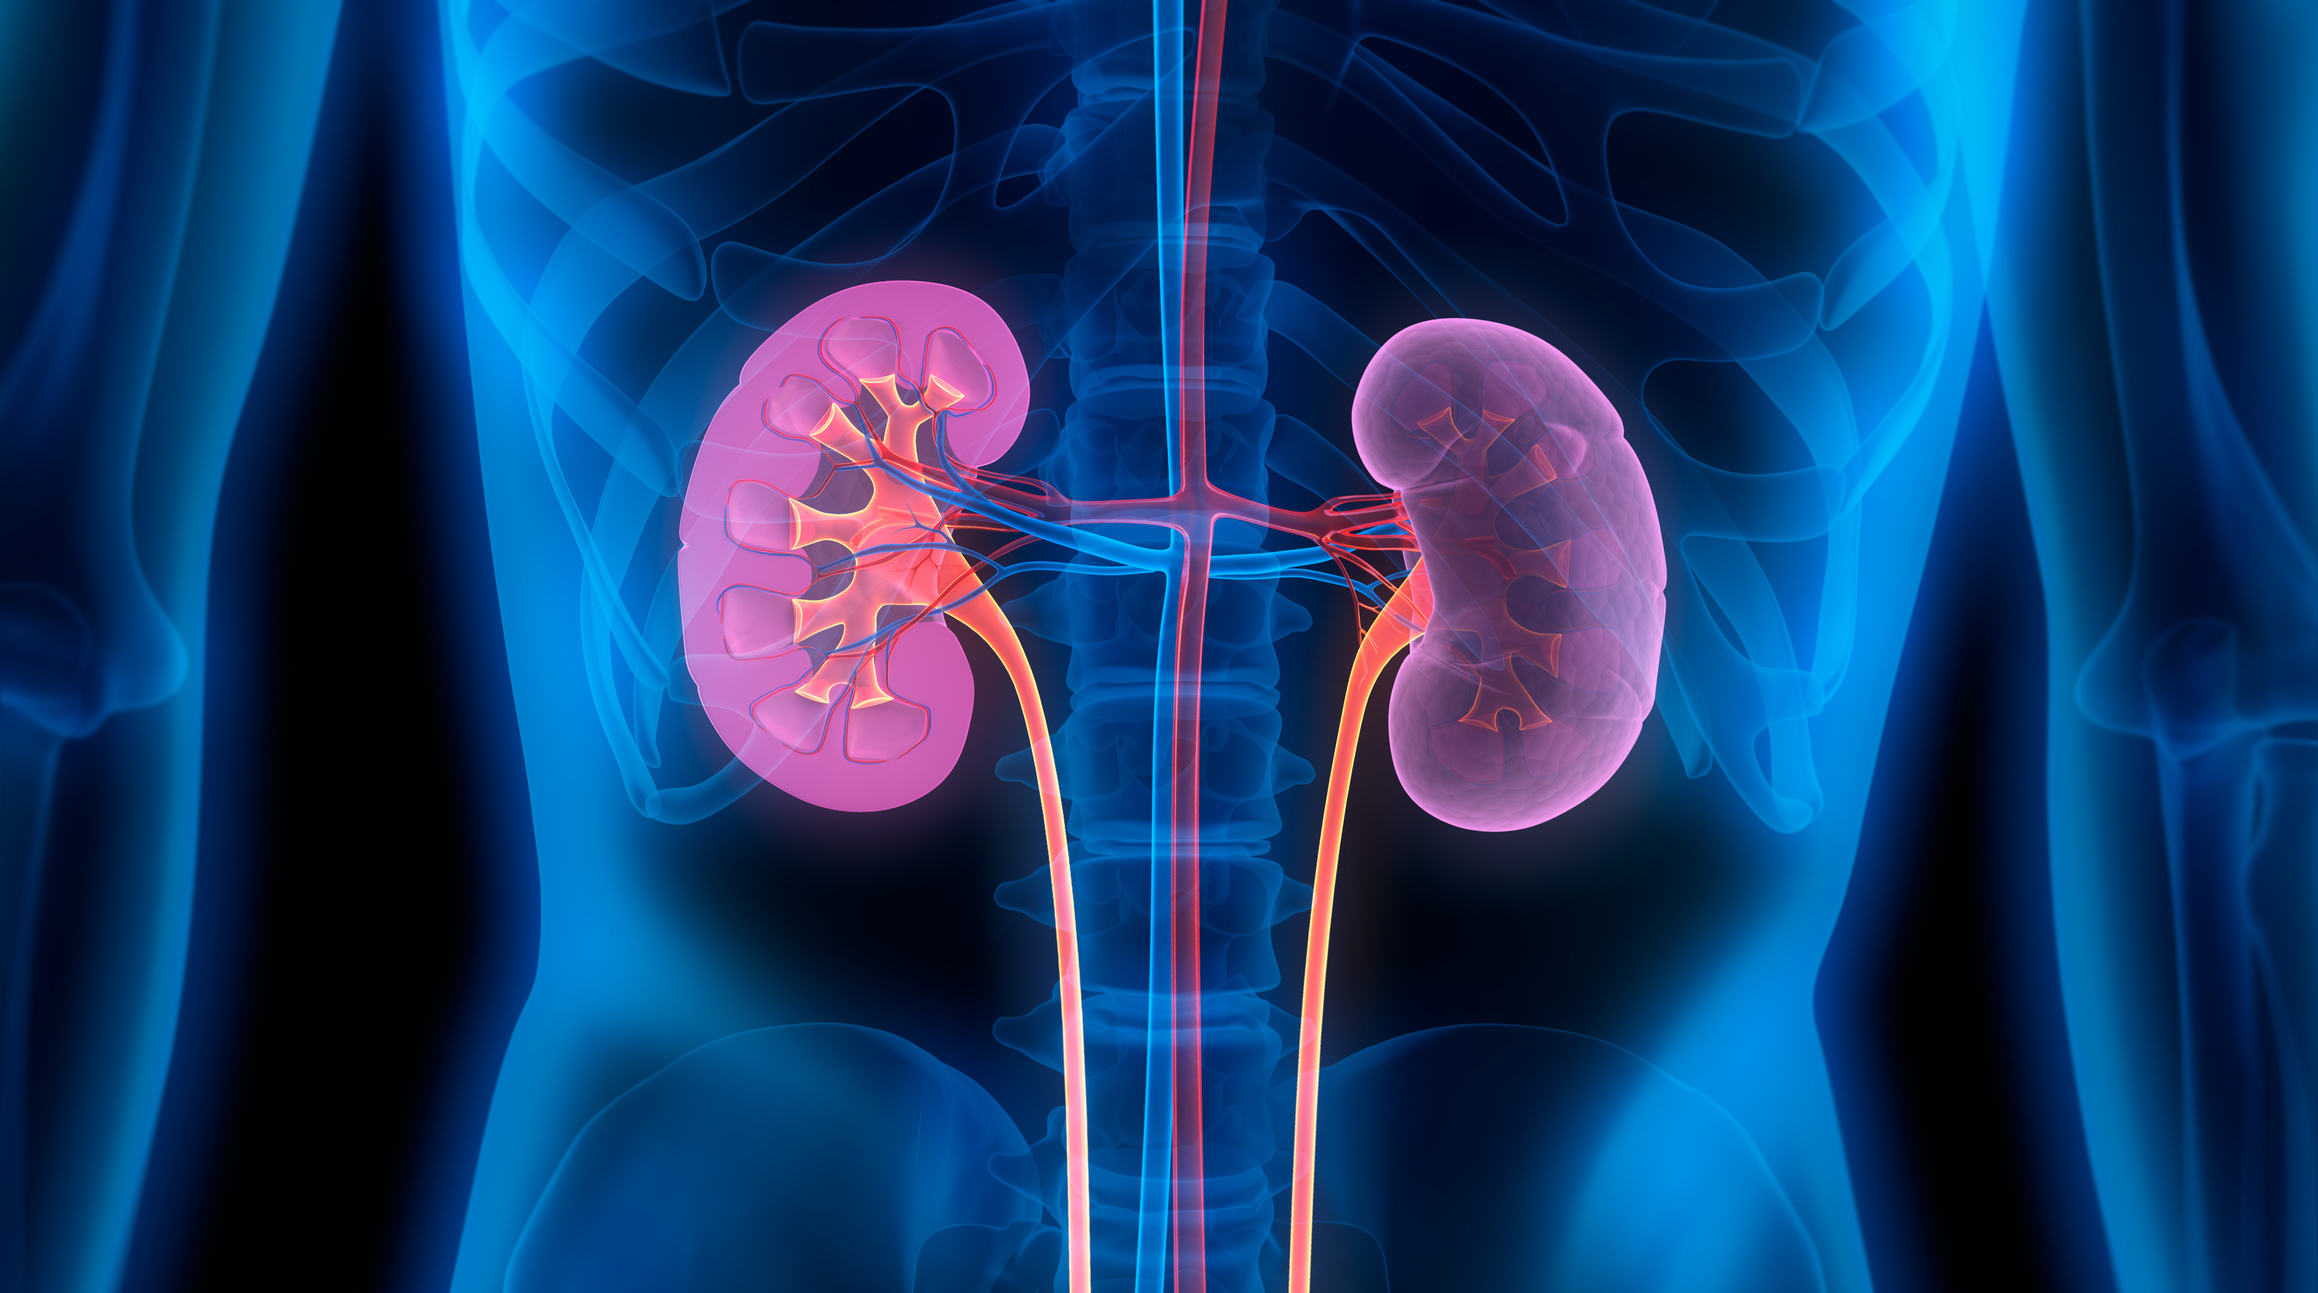 CAM Use in More Than One-Third of Patients With CKD